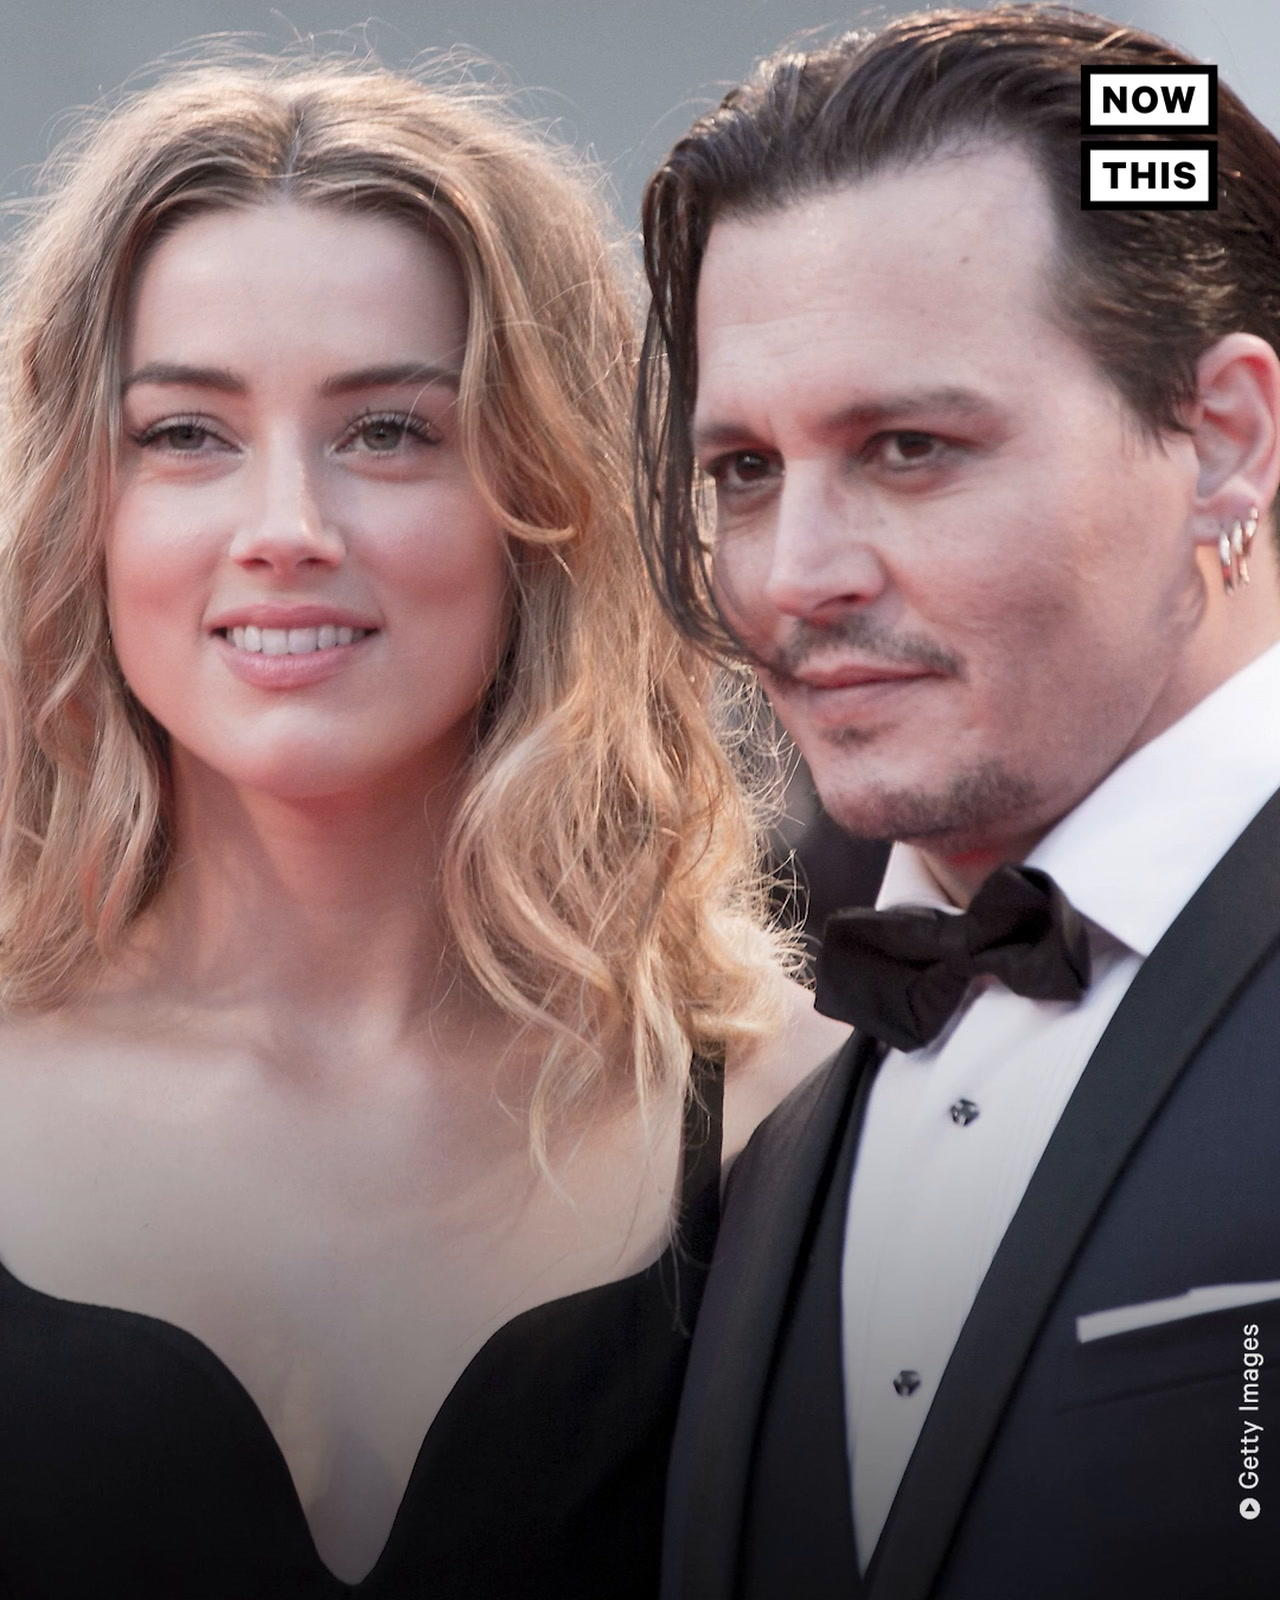 Amber Heard Is a Domestic Violence Survivor, Expert Says